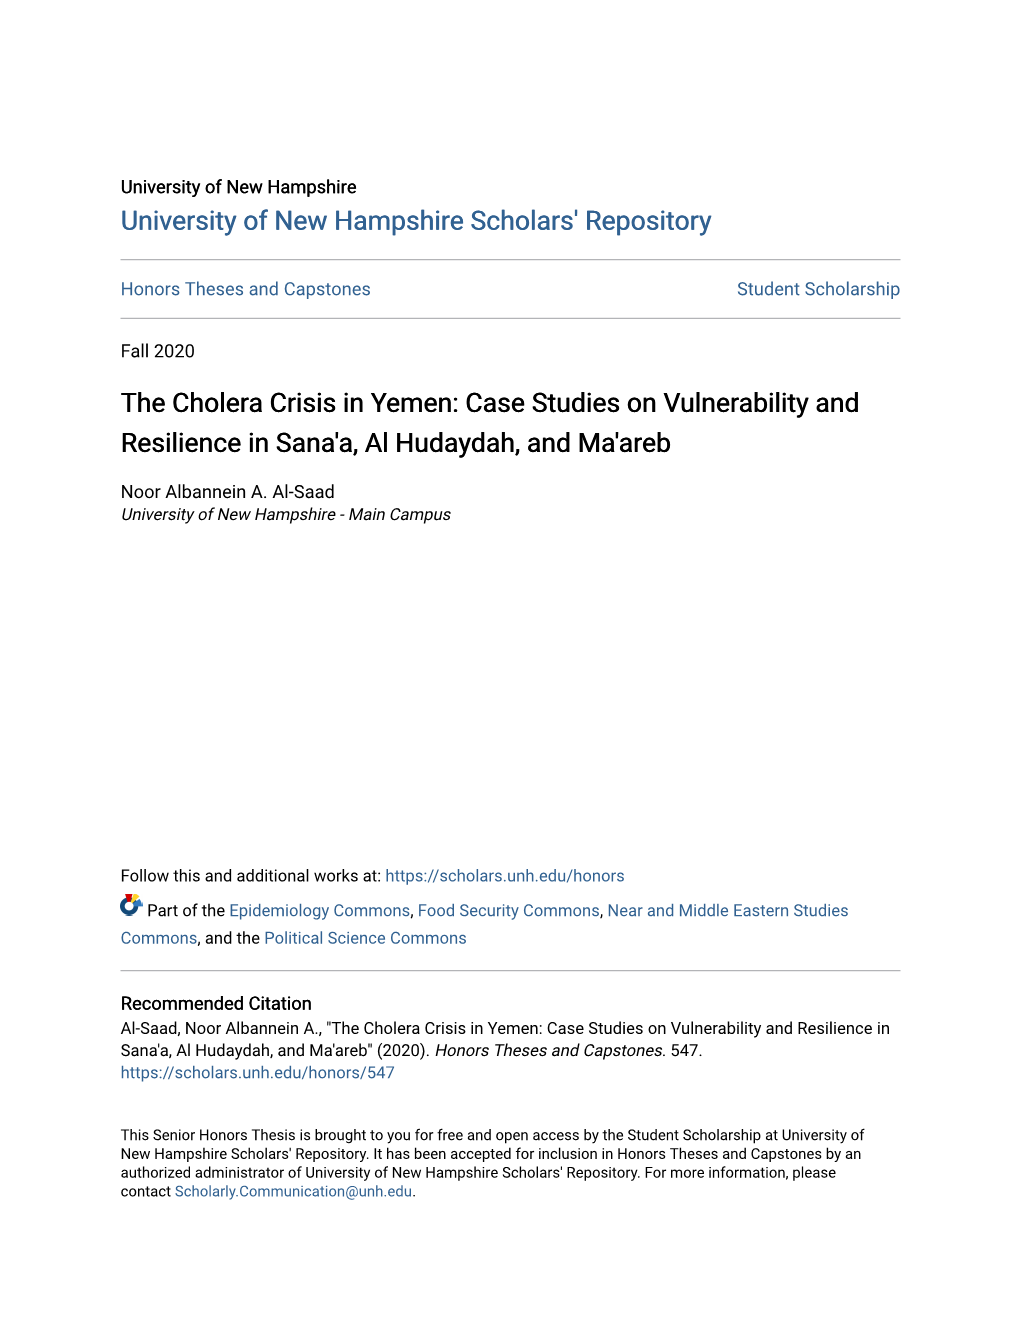 The Cholera Crisis in Yemen: Case Studies on Vulnerability and Resilience in Sana'a, Al Hudaydah, and Ma'areb